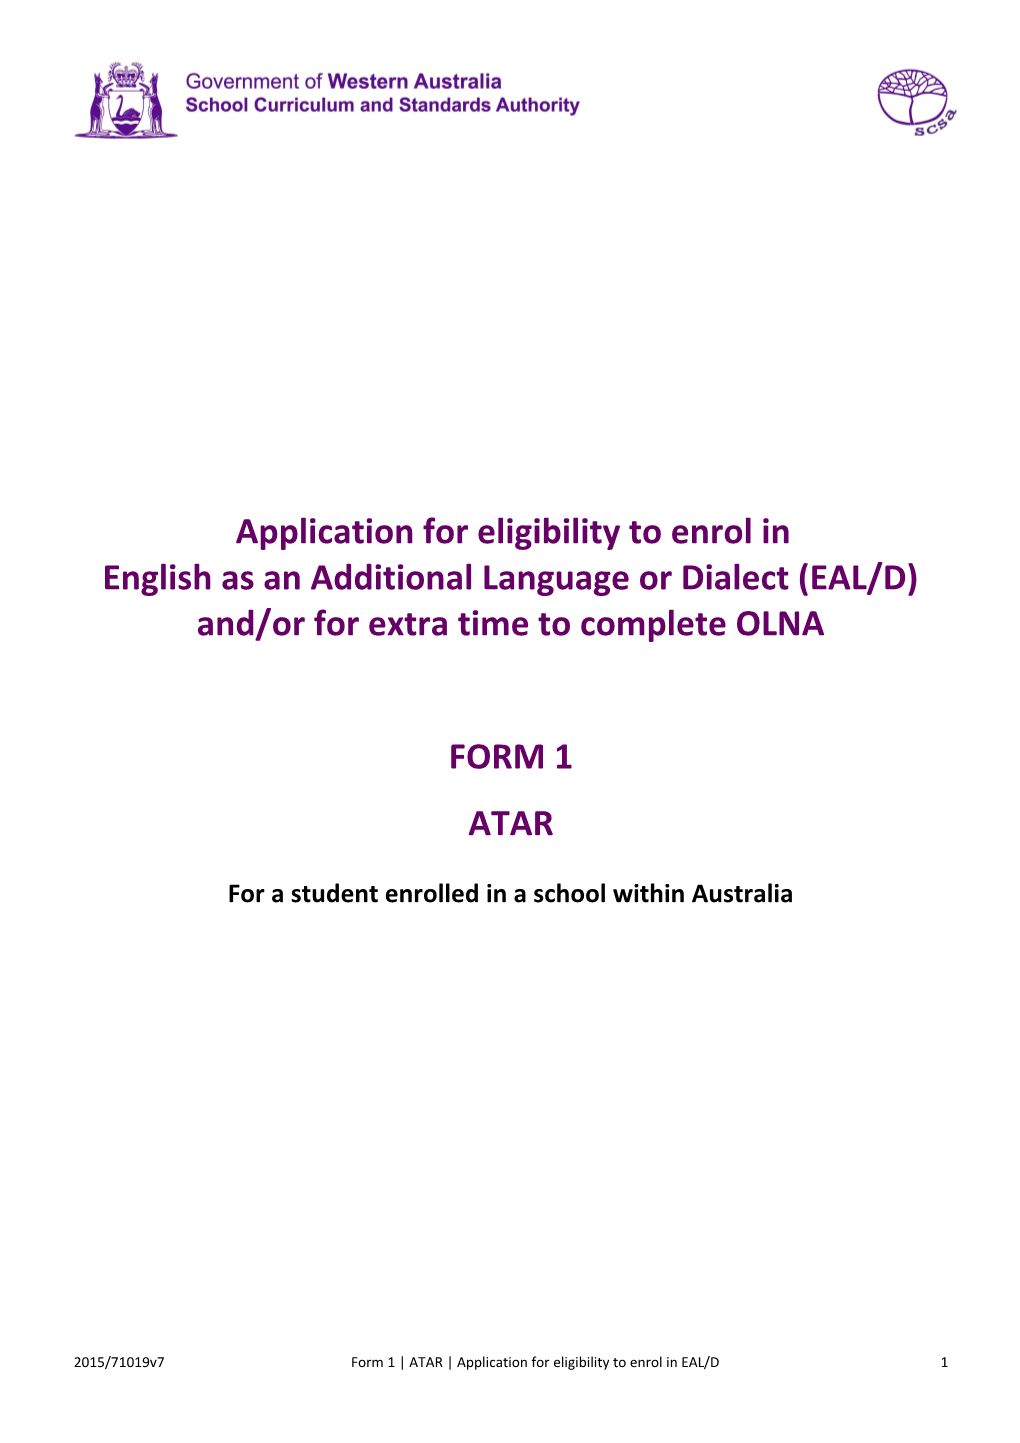 For a Student Enrolled in a School Within Australia